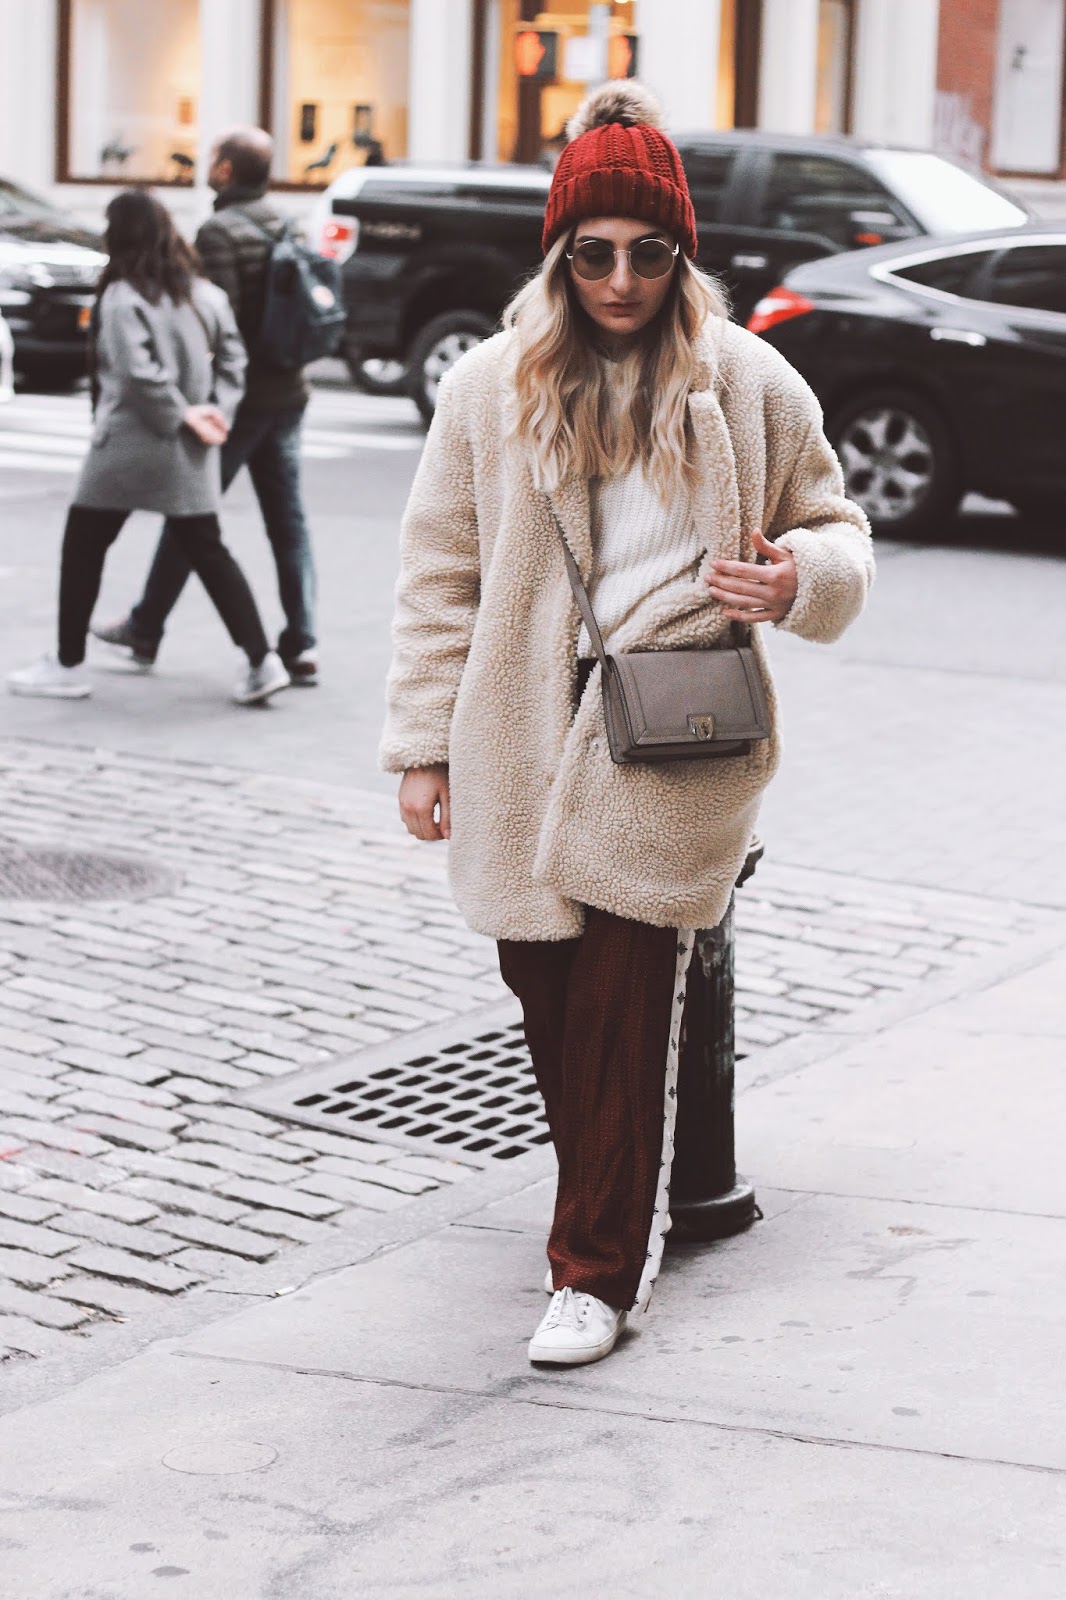 The Teddy Coat You Need for Winter — life according to francesca